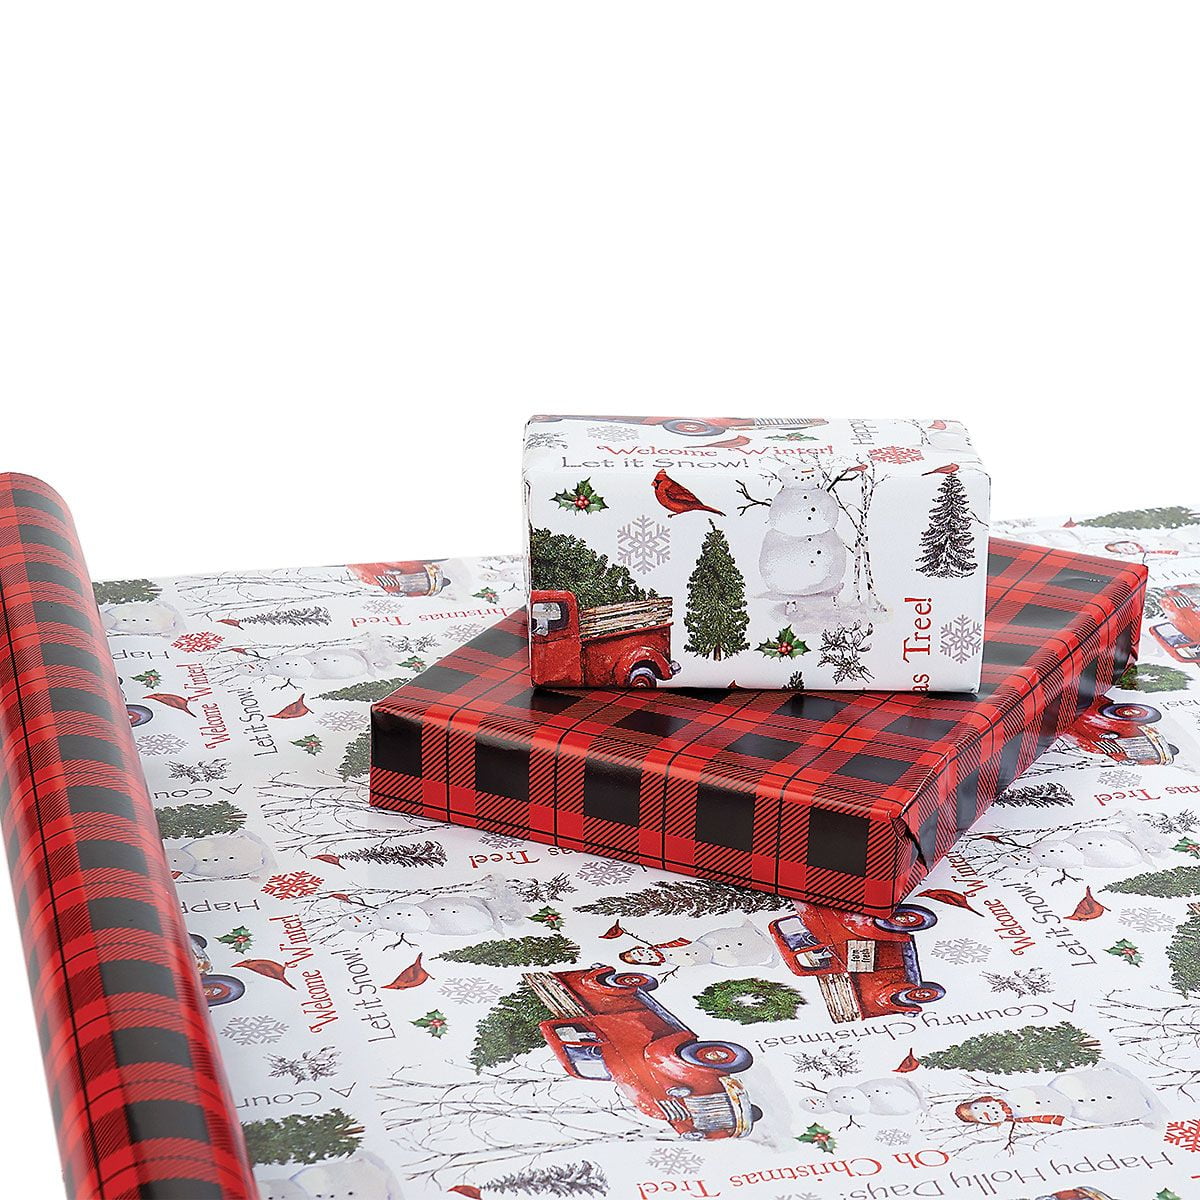 Santa Buffalo Plaid Wishes Kraft Red and Black Holiday /Christmas Gift Wrap  Wrapping Paper 15ft Roll 